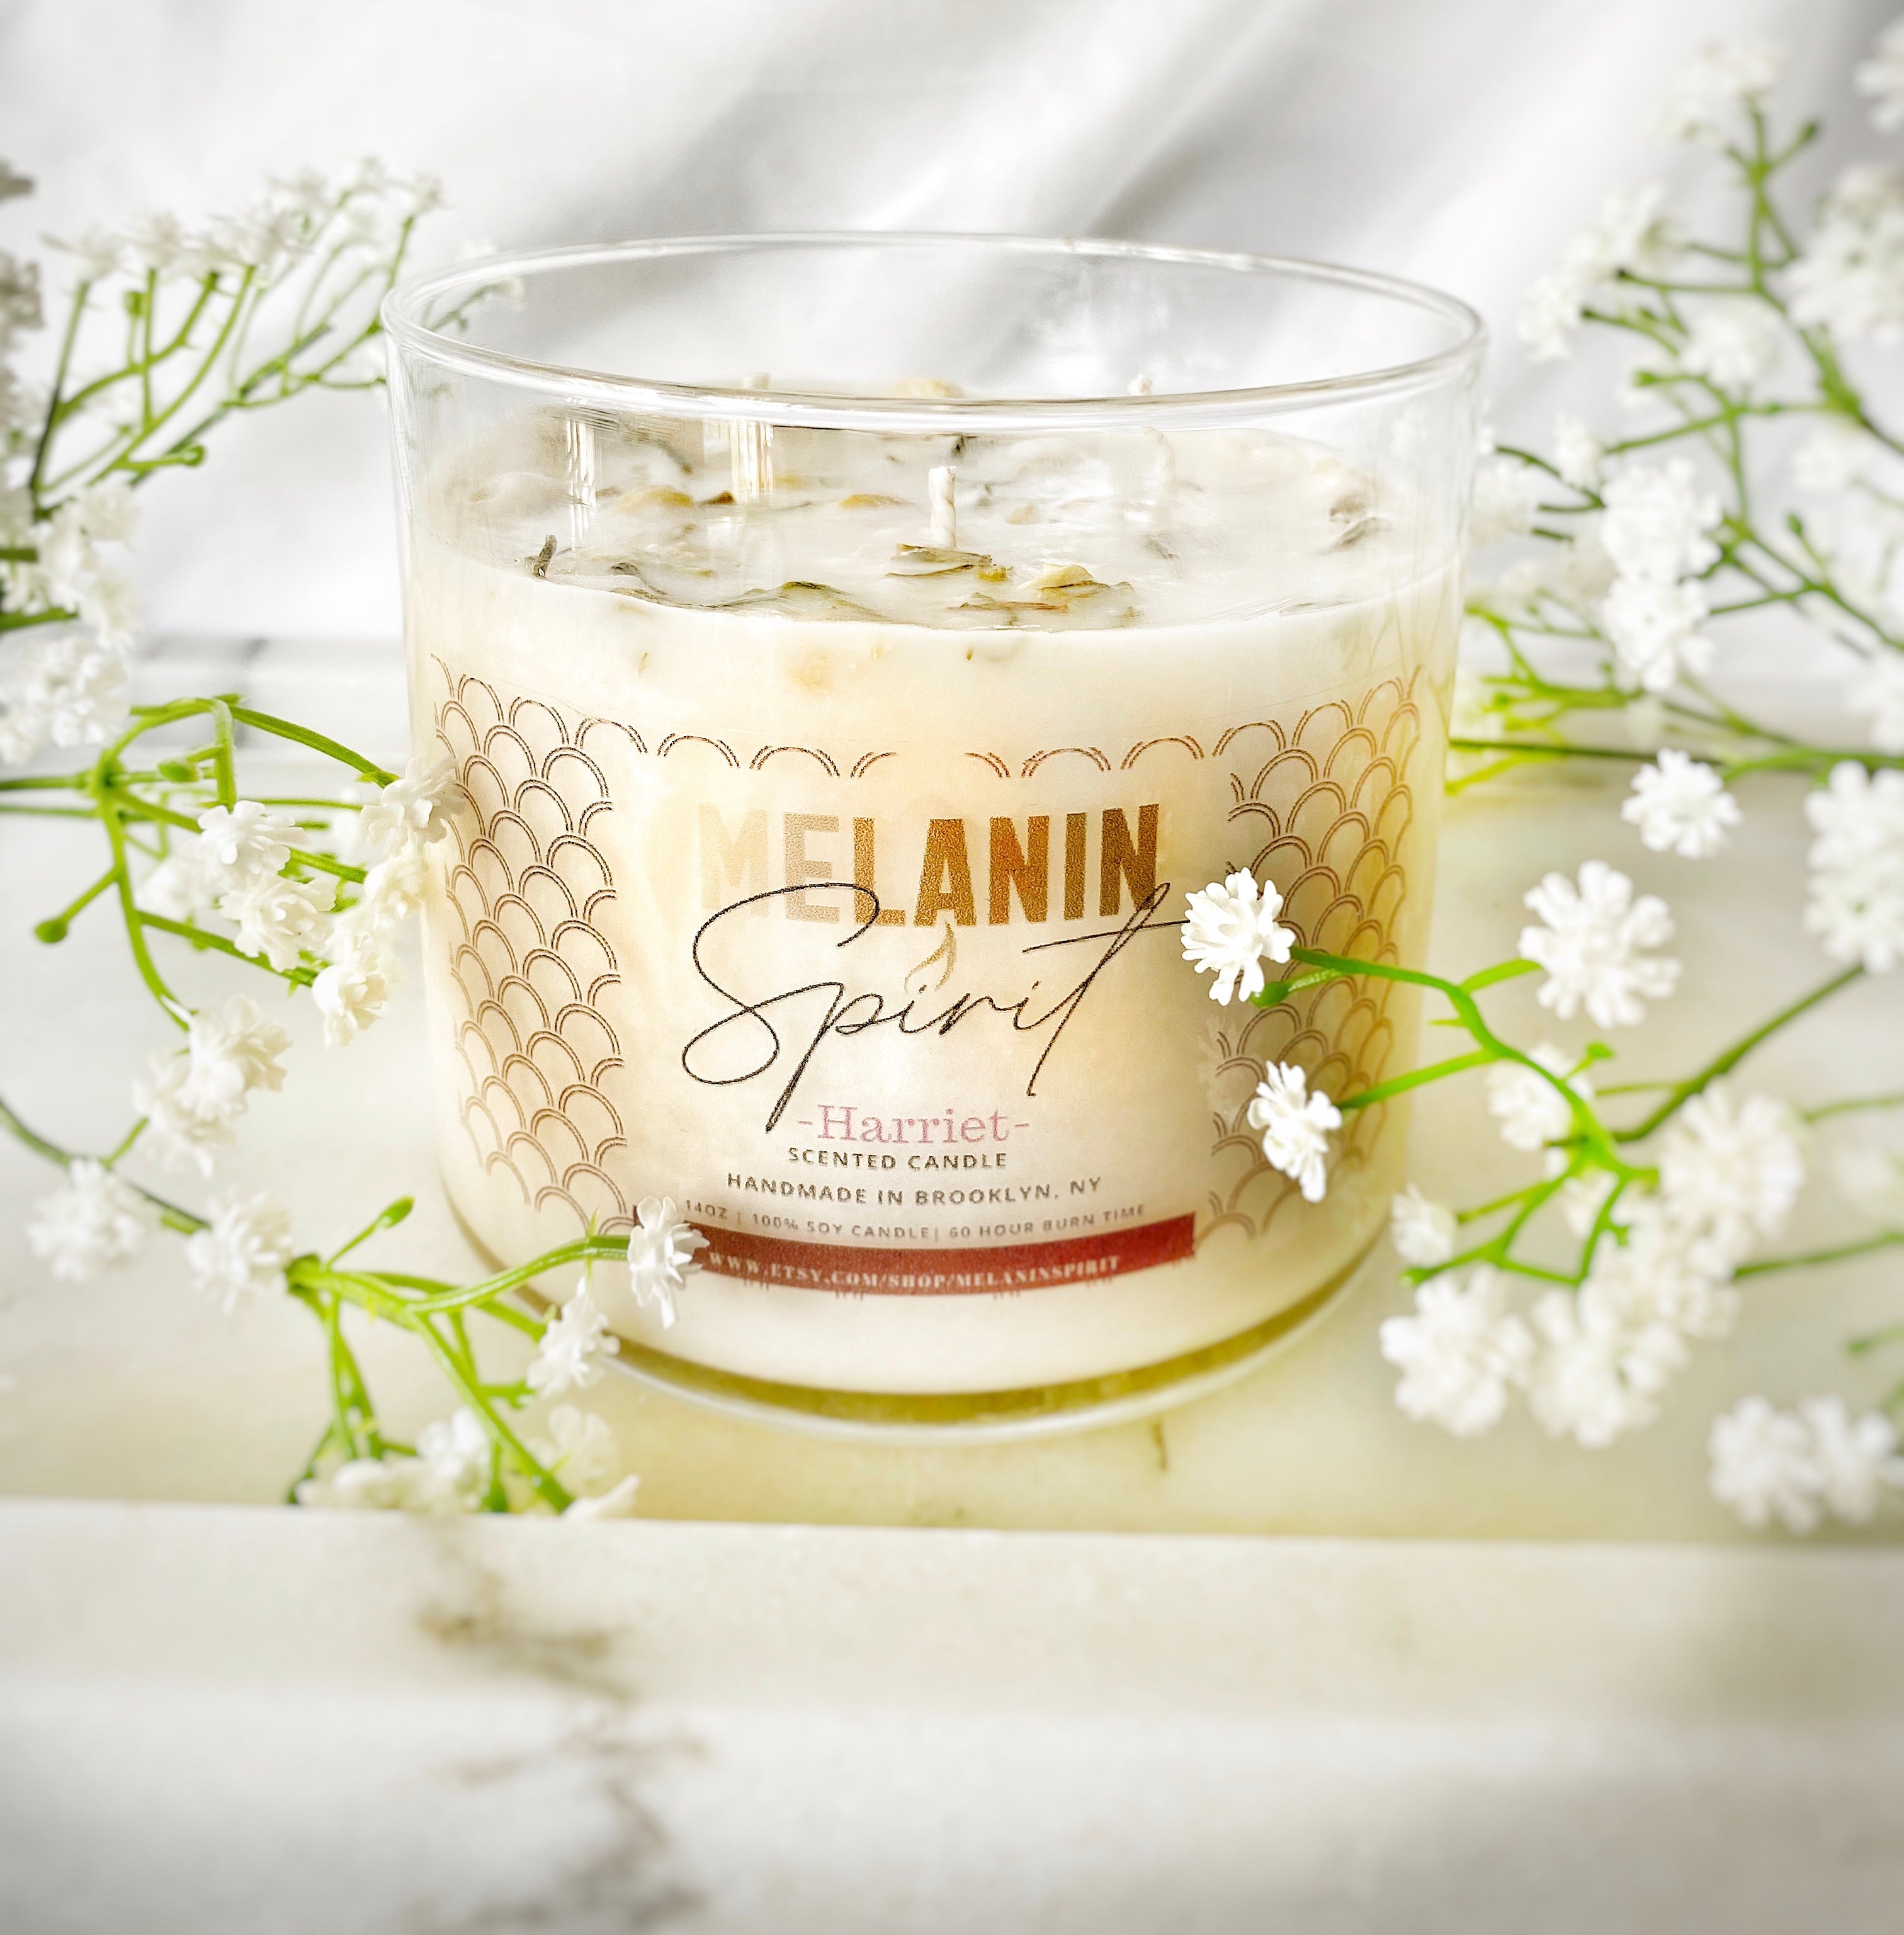 Harriet Tubman Inspired Scented Candle with notes of cactus blossoms and Jasmine.